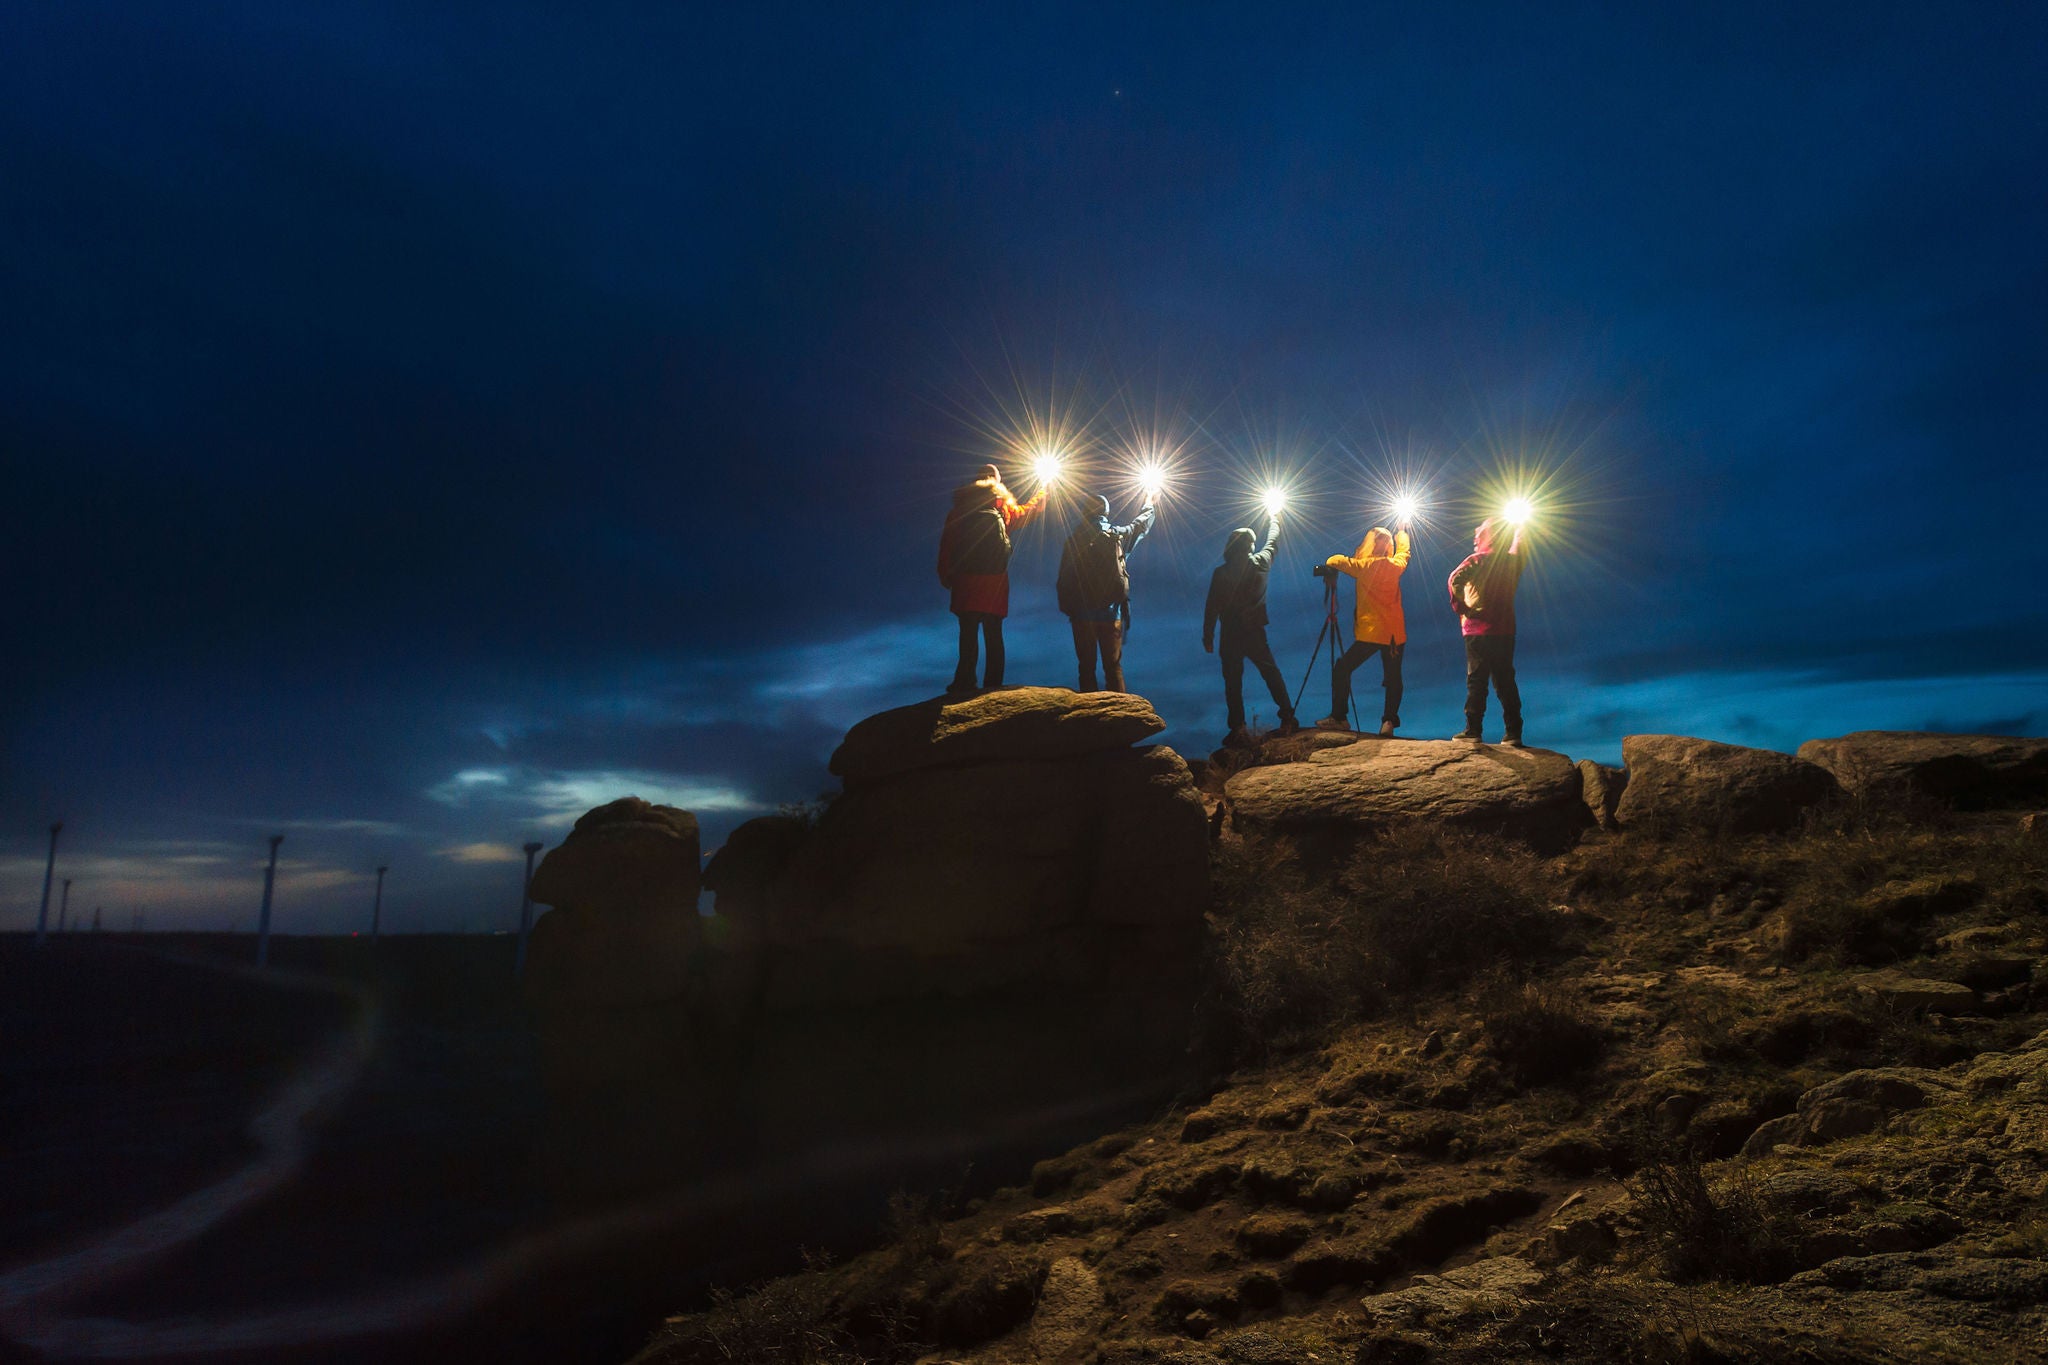 A group of night sky photographers stand on the stone with lamp at night